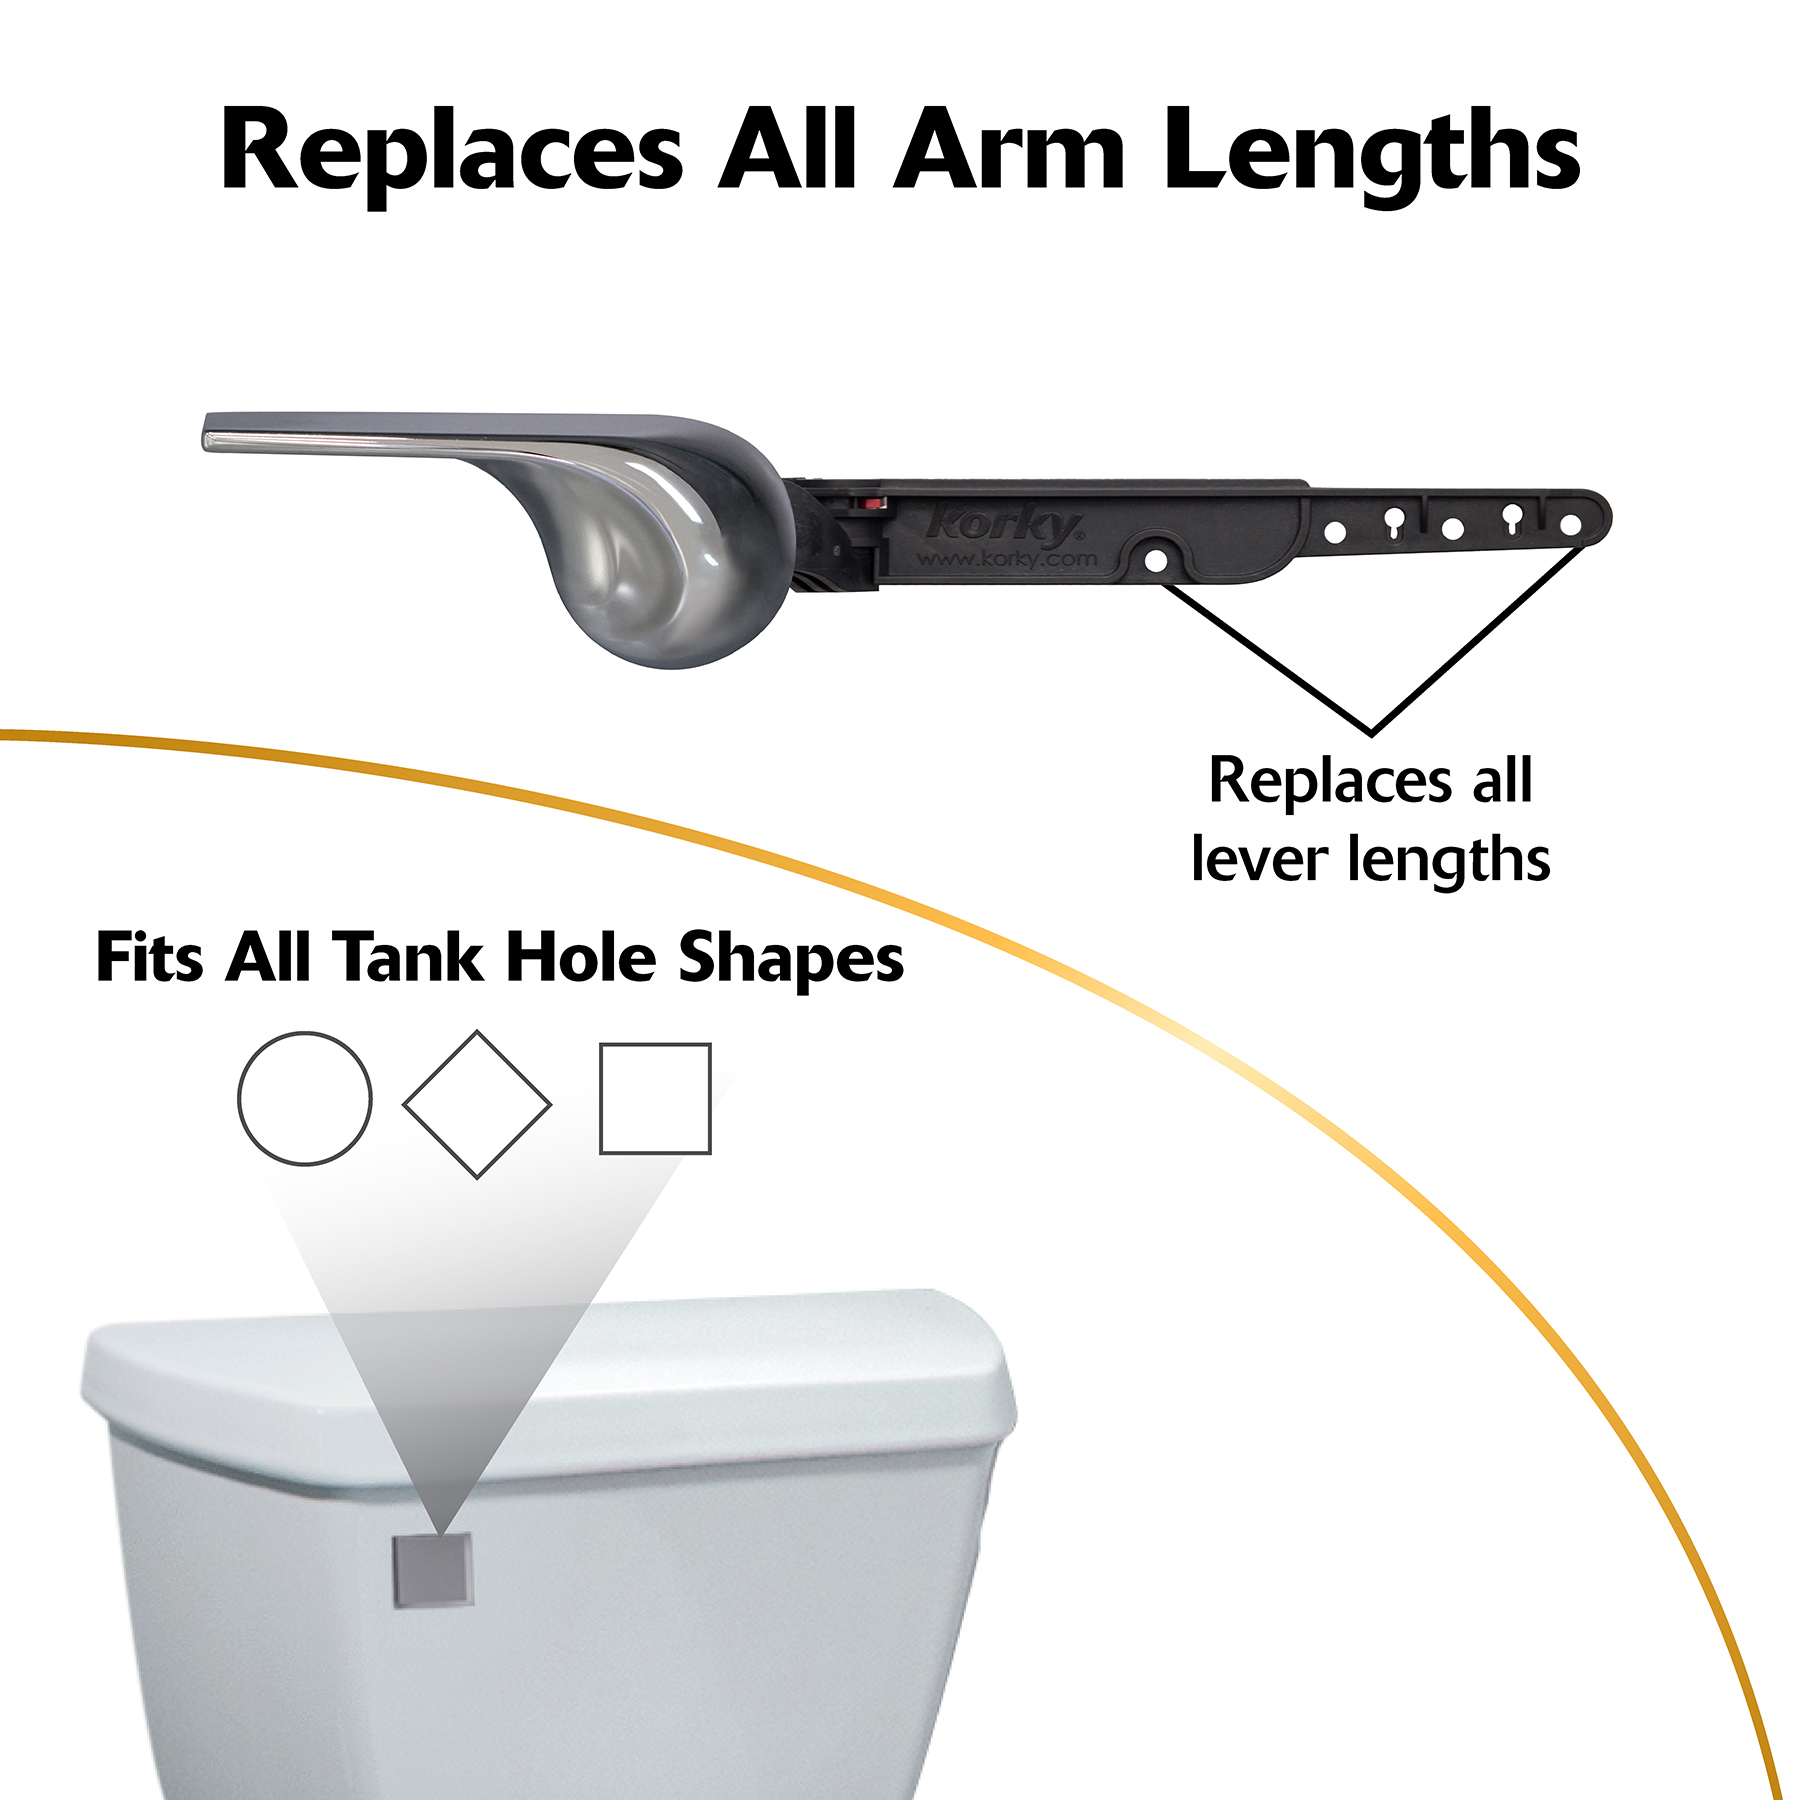 Chrome wave style toilet handle replaces all arm lengths and fits all toilet tank hole shapes